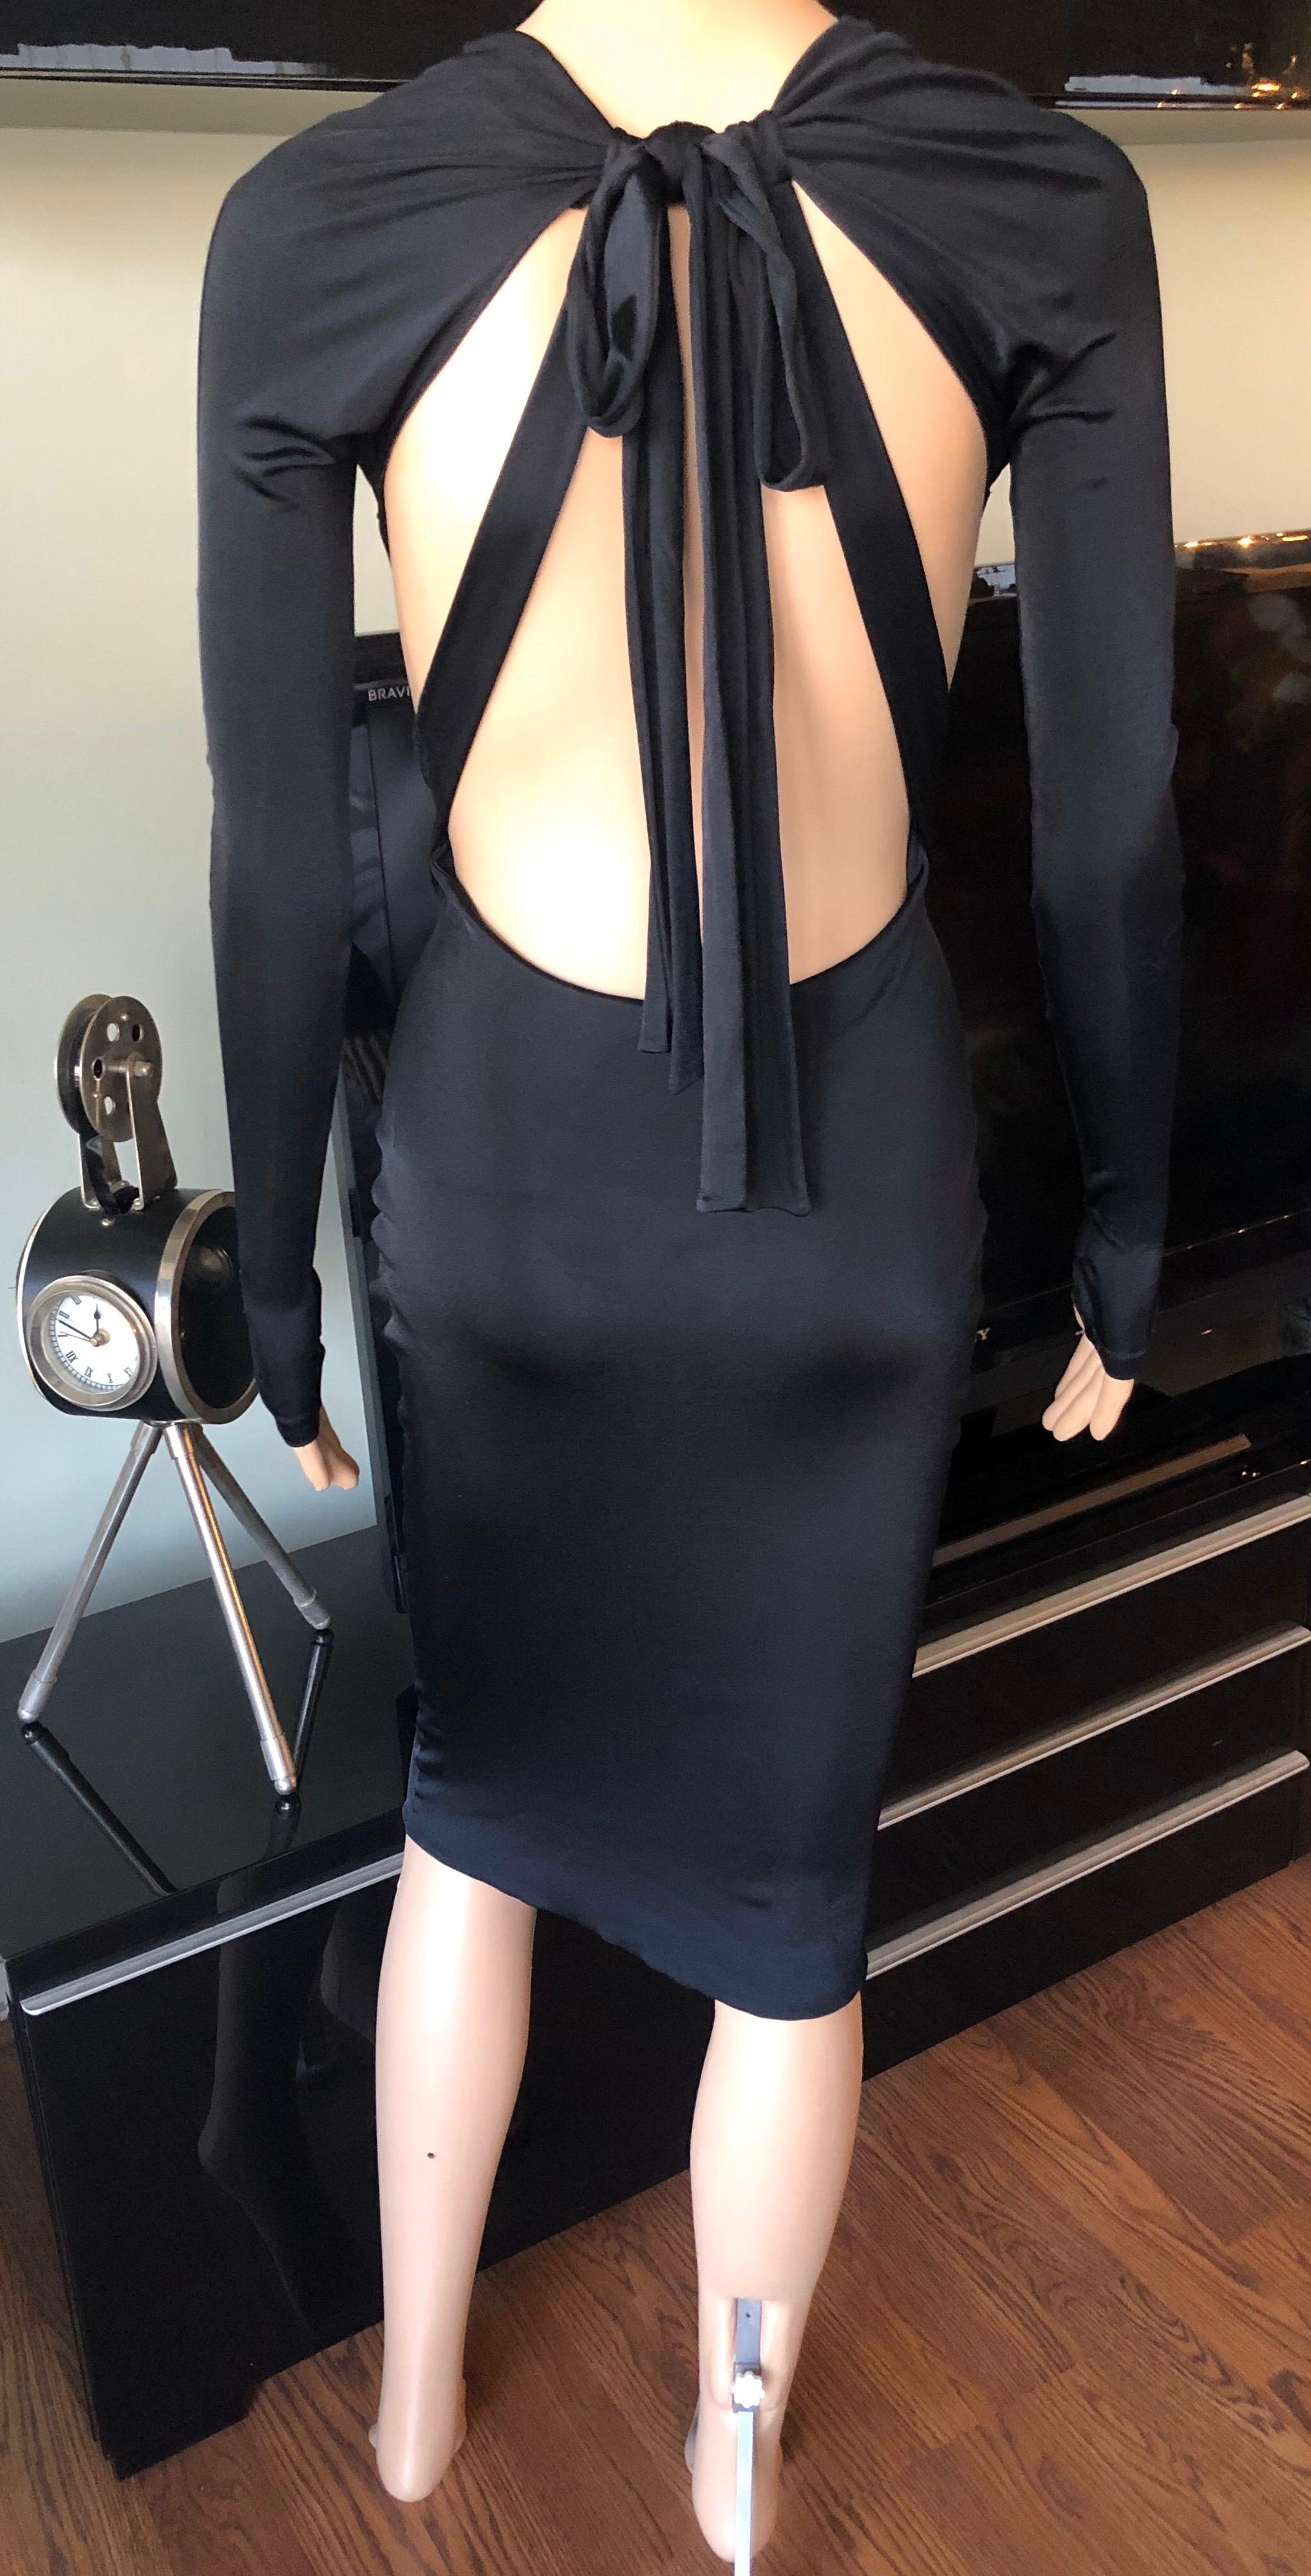 Gucci S/S 2005 Tom Ford Plunging Cutout Backless Bodycon Black Dress For Sale 2